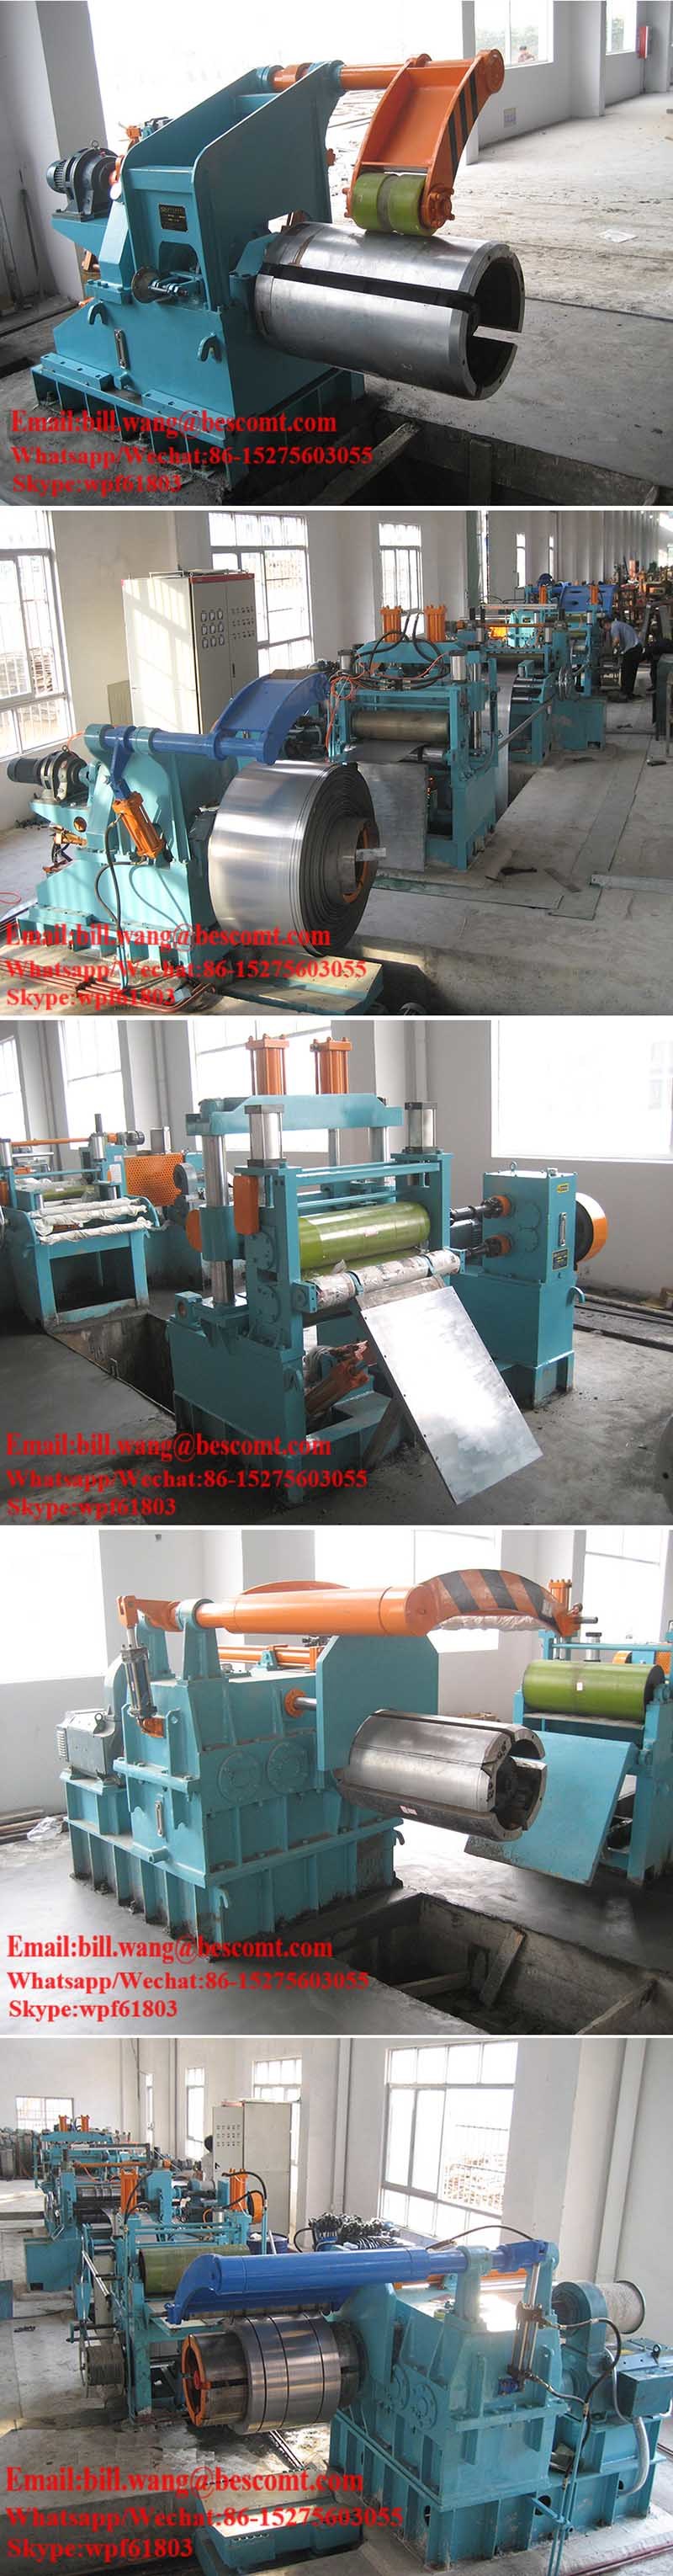  Steel Coil Slitting Line/Cut to Length Machine 